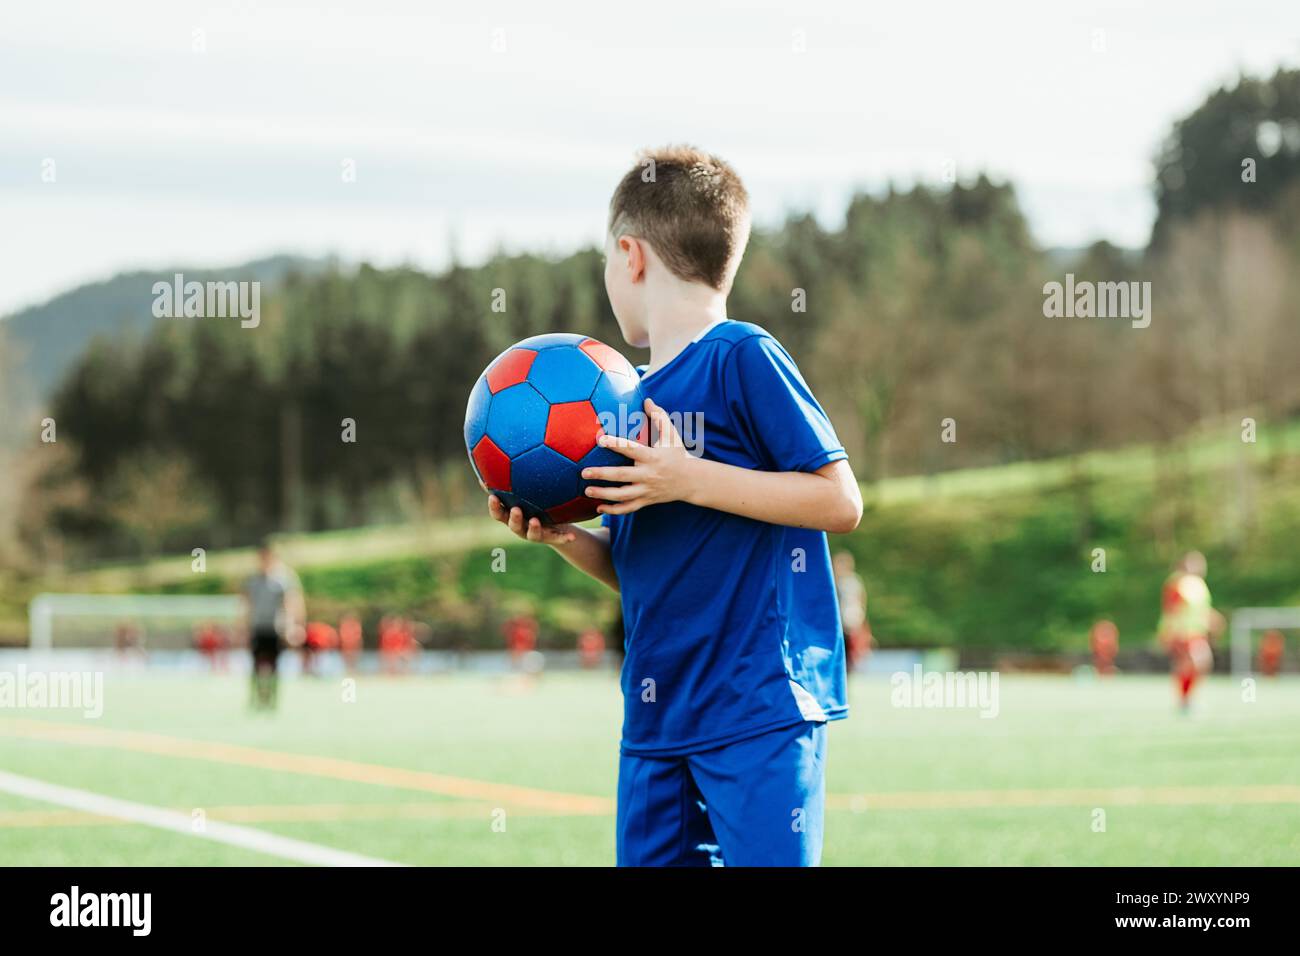 A young boy in a blue jersey lovingly holds a soccer ball, watching a match on a sunny field Stock Photo